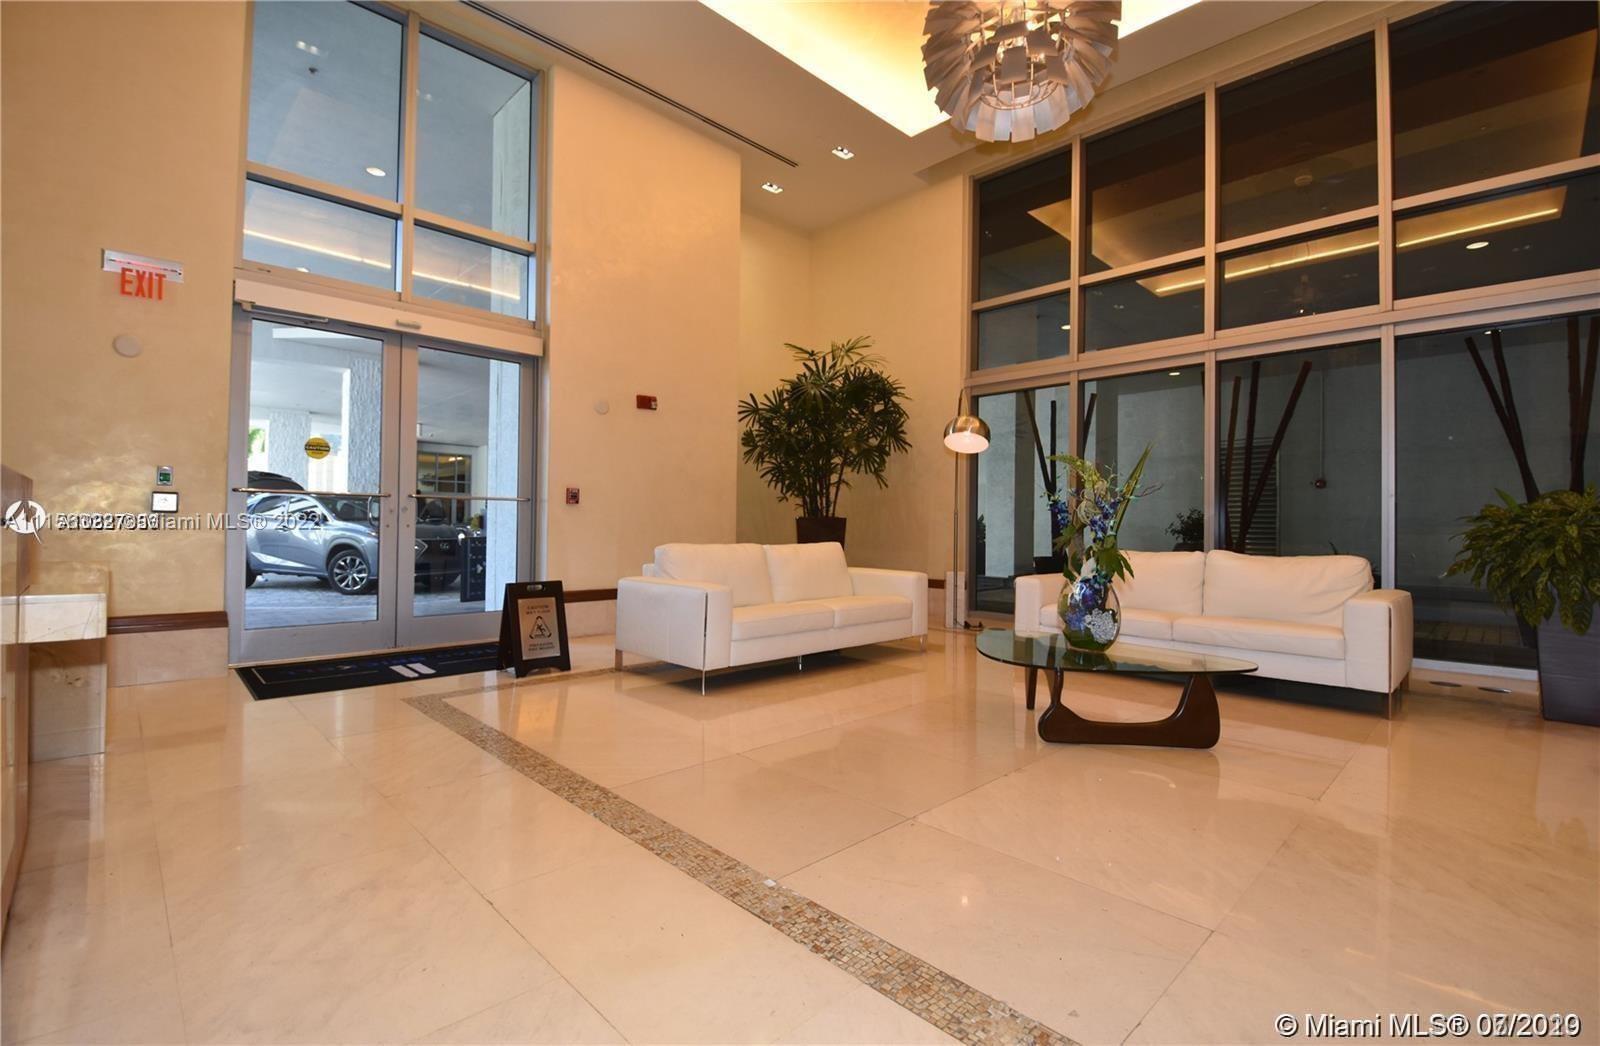 Excellent opportunity to own  in one of the most desirable buildings in Brickell.  Enjoy a number of